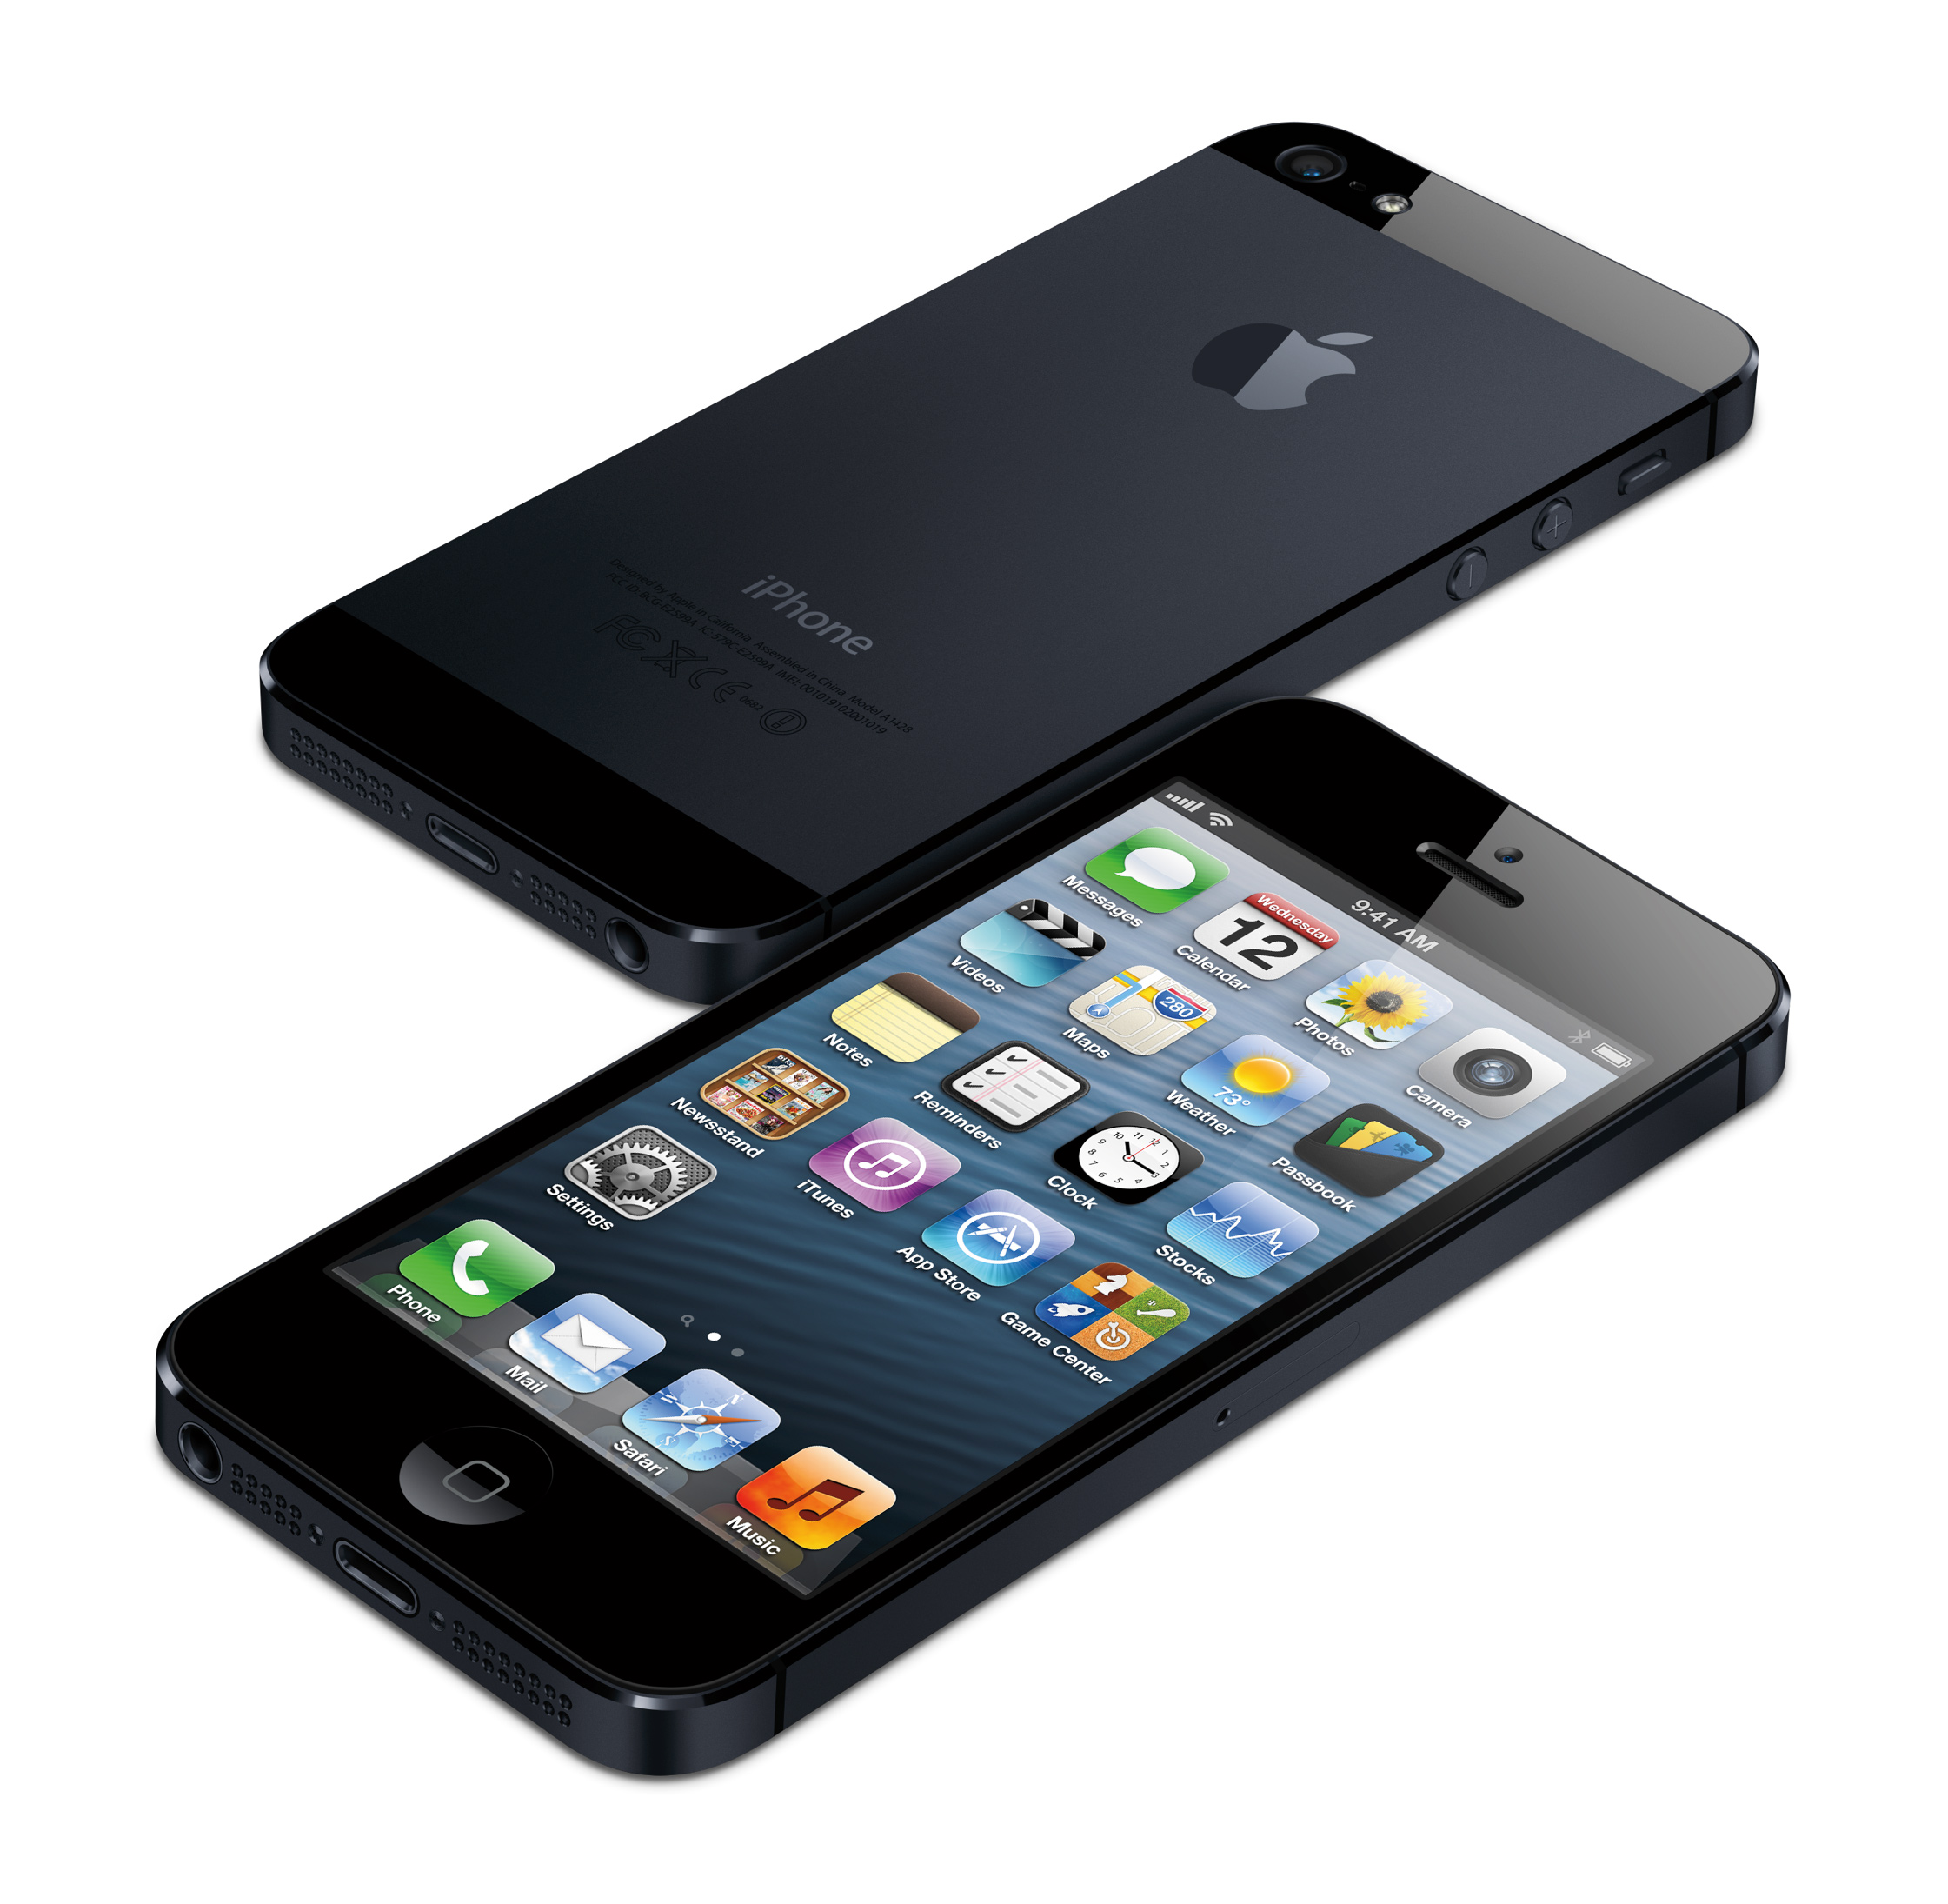 A look at the iPhone 5